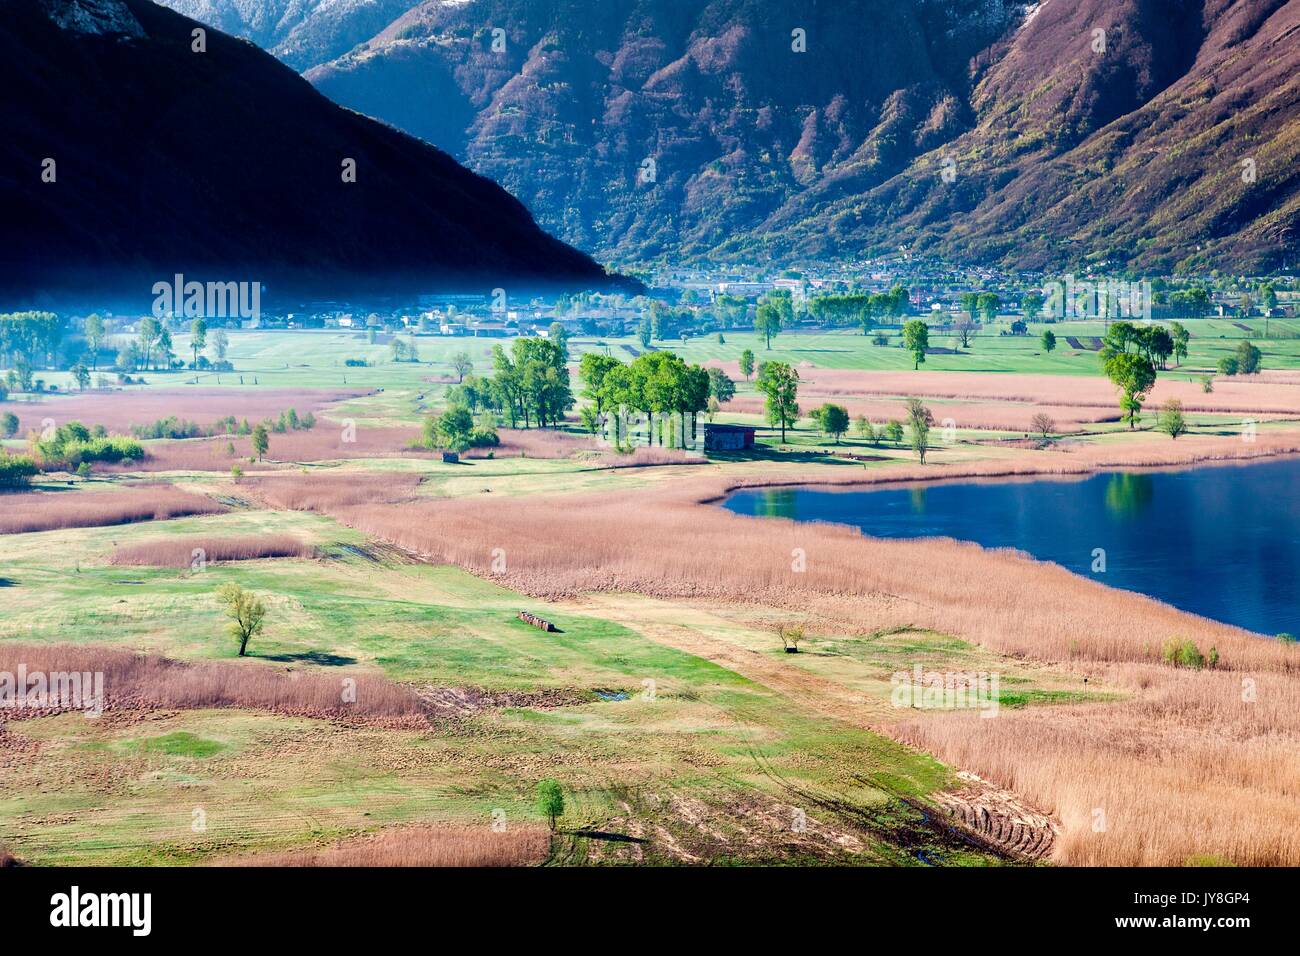 Meadows and a bed of reeds in the Pian di Spagna Reserve, Valchiavenna, Italy Stock Photo